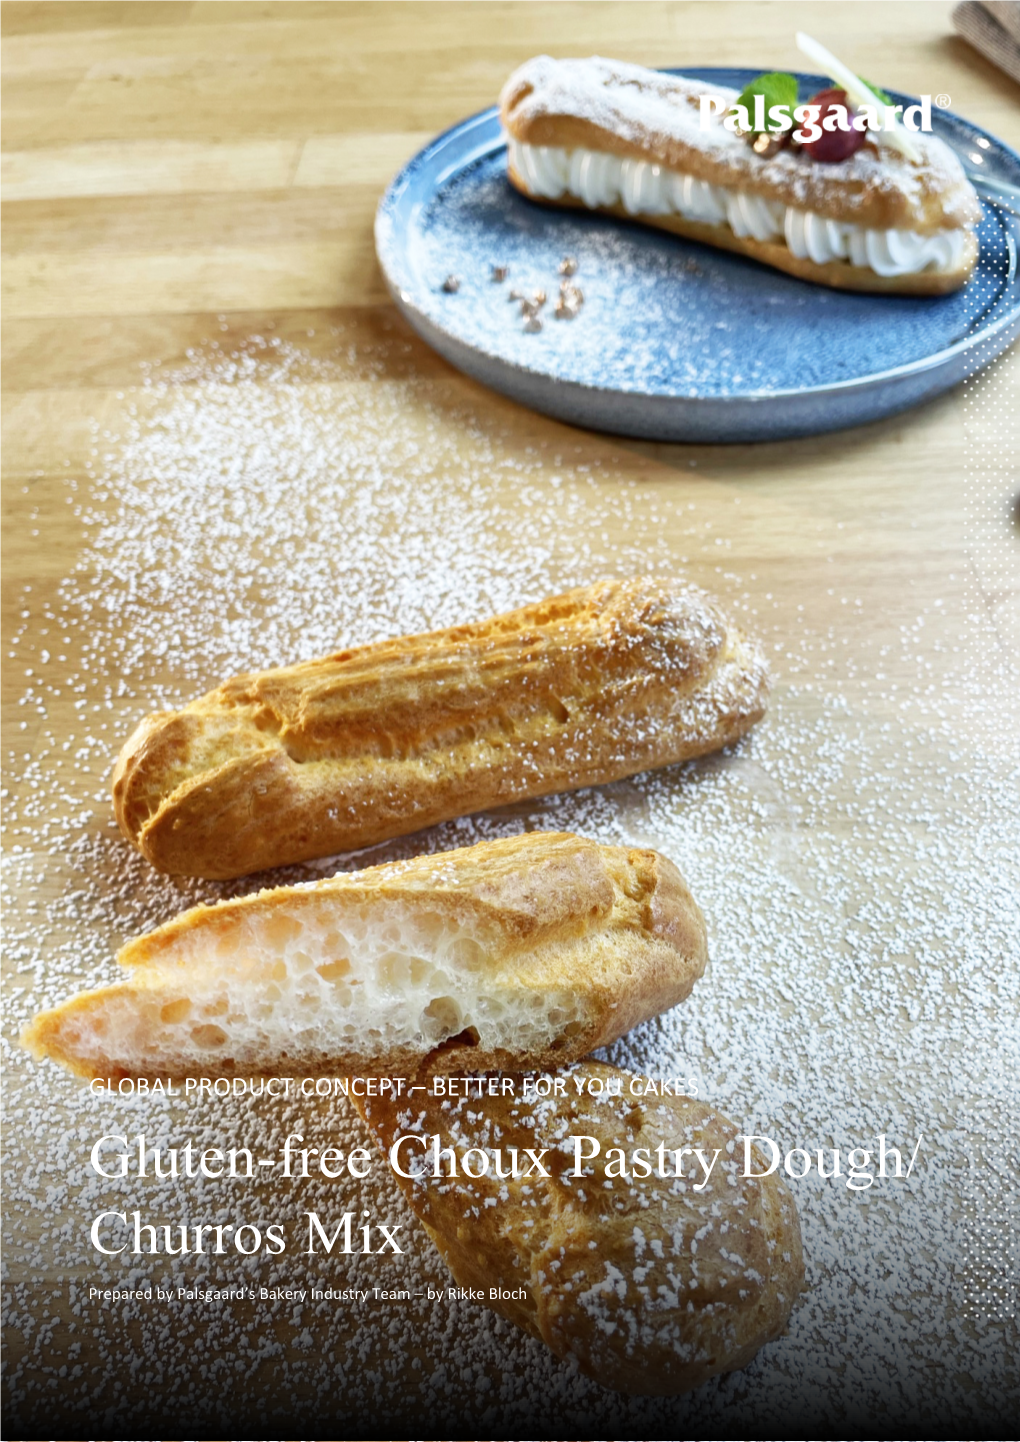 Gluten-Free Choux Pastry Dough/ Churros Mix Prepared by Palsgaard’S Bakery Industry Team – by Rikke Bloch